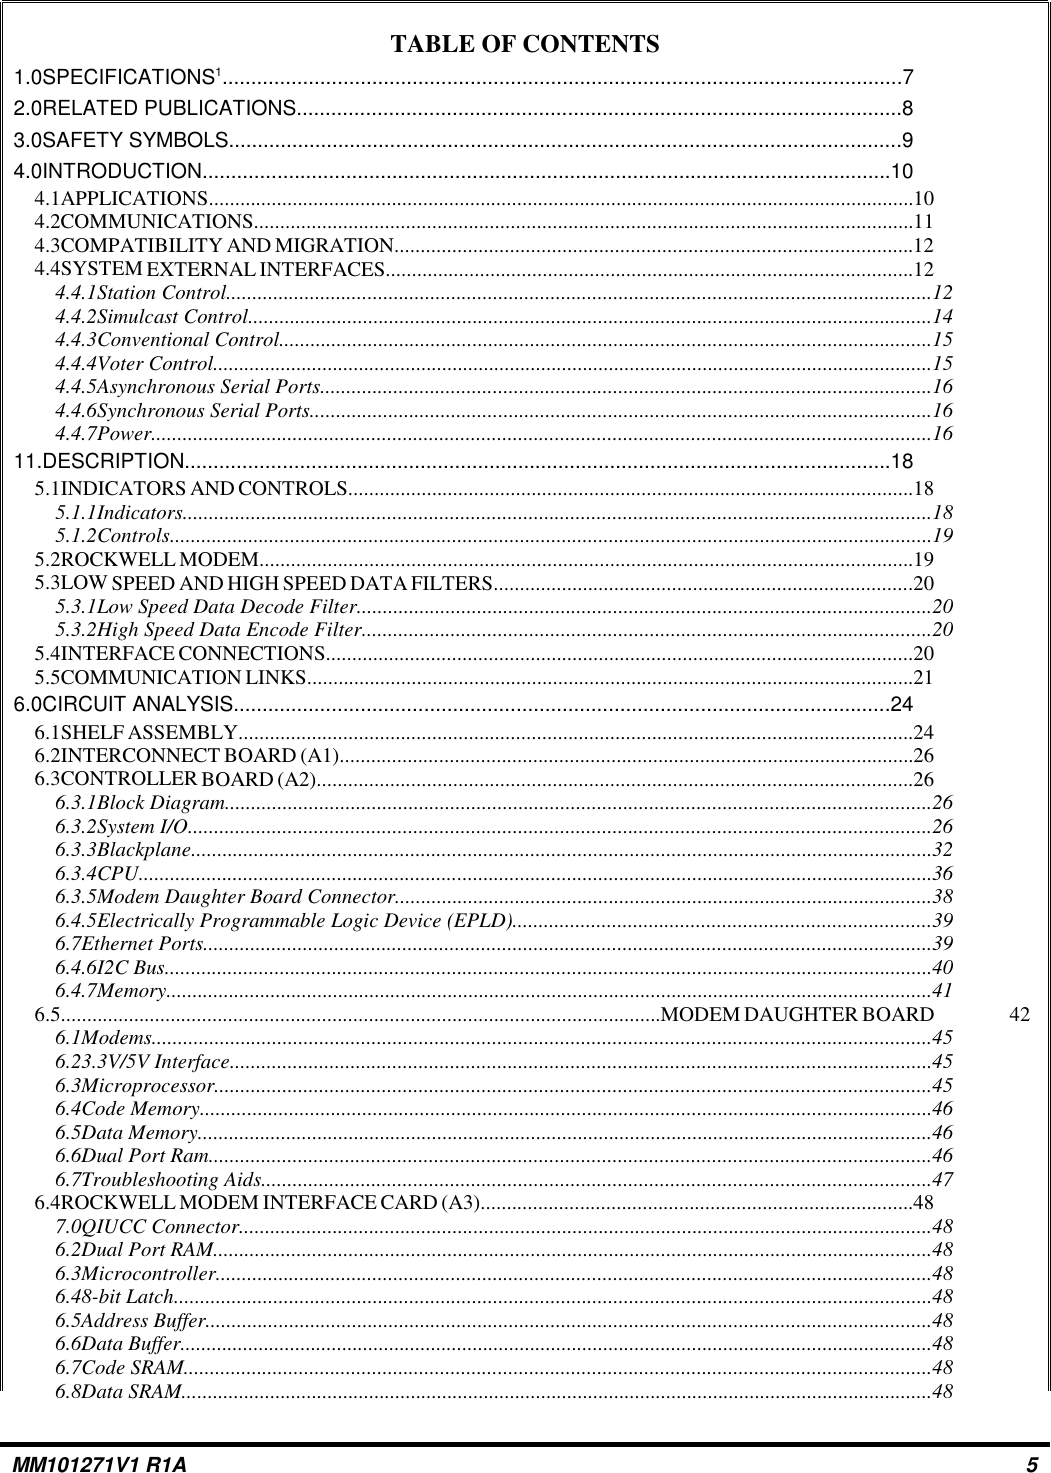 TABLE OF CONTENTS1.0SPECIFICATIONS1......................................................................................................................72.0RELATED PUBLICATIONS.........................................................................................................83.0SAFETY SYMBOLS.....................................................................................................................94.0INTRODUCTION........................................................................................................................104.1APPLICATIONS.......................................................................................................................................104.2COMMUNICATIONS..............................................................................................................................114.3COMPATIBILITY AND MIGRATION...................................................................................................124.4SYSTEM EXTERNAL INTERFACES.....................................................................................................124.4.1Station Control.......................................................................................................................................124.4.2Simulcast Control...................................................................................................................................144.4.3Conventional Control.............................................................................................................................154.4.4Voter Control..........................................................................................................................................154.4.5Asynchronous Serial Ports.....................................................................................................................164.4.6Synchronous Serial Ports.......................................................................................................................164.4.7Power.....................................................................................................................................................1611.DESCRIPTION...........................................................................................................................185.1INDICATORS AND CONTROLS............................................................................................................185.1.1Indicators...............................................................................................................................................185.1.2Controls..................................................................................................................................................195.2ROCKWELL MODEM.............................................................................................................................195.3LOW SPEED AND HIGH SPEED DATA FILTERS................................................................................205.3.1Low Speed Data Decode Filter..............................................................................................................205.3.2High Speed Data Encode Filter.............................................................................................................205.4INTERFACE CONNECTIONS................................................................................................................205.5COMMUNICATION LINKS....................................................................................................................216.0CIRCUIT ANALYSIS..................................................................................................................246.1SHELF ASSEMBLY.................................................................................................................................246.2INTERCONNECT BOARD (A1)..............................................................................................................266.3CONTROLLER BOARD (A2)..................................................................................................................266.3.1Block Diagram.......................................................................................................................................266.3.2System I/O..............................................................................................................................................266.3.3Blackplane..............................................................................................................................................326.3.4CPU........................................................................................................................................................366.3.5Modem Daughter Board Connector.......................................................................................................386.4.5Electrically Programmable Logic Device (EPLD)................................................................................396.7Ethernet Ports...........................................................................................................................................396.4.6I2C Bus...................................................................................................................................................406.4.7Memory...................................................................................................................................................416.5...................................................................................................................MODEM DAUGHTER BOARD 426.1Modems.....................................................................................................................................................456.23.3V/5V Interface......................................................................................................................................456.3Microprocessor.........................................................................................................................................456.4Code Memory............................................................................................................................................466.5Data Memory.............................................................................................................................................466.6Dual Port Ram..........................................................................................................................................466.7Troubleshooting Aids................................................................................................................................476.4ROCKWELL MODEM INTERFACE CARD (A3)...................................................................................487.0QIUCC Connector.....................................................................................................................................486.2Dual Port RAM..........................................................................................................................................486.3Microcontroller.........................................................................................................................................486.48-bit Latch.................................................................................................................................................486.5Address Buffer...........................................................................................................................................486.6Data Buffer................................................................................................................................................486.7Code SRAM...............................................................................................................................................486.8Data SRAM................................................................................................................................................48MM101271V1 R1A 5